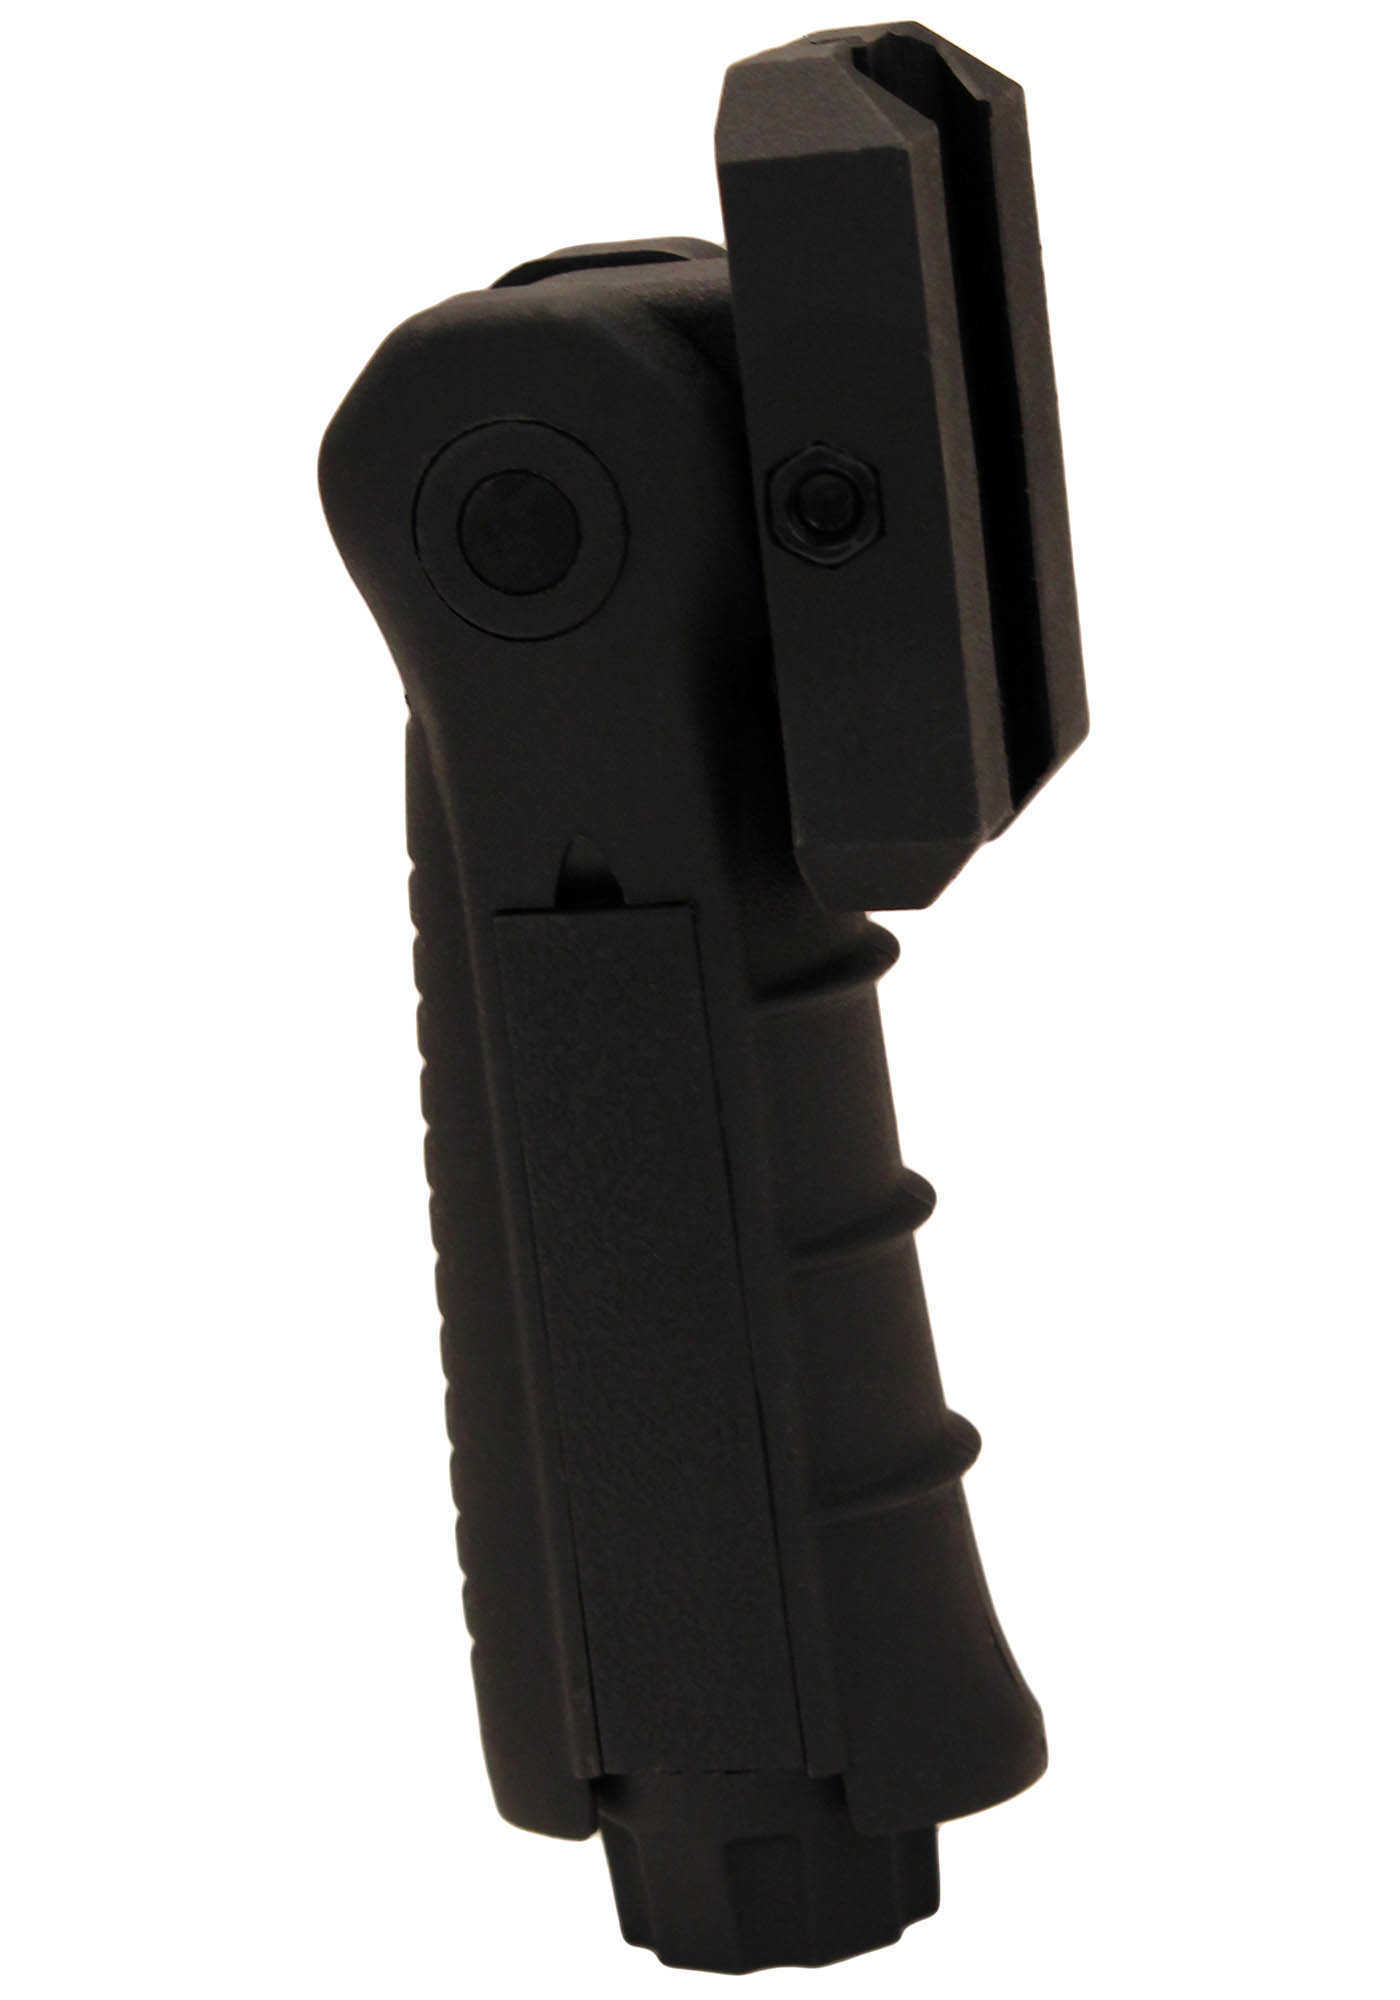 Leapers UTG Vertical Foregrip Folding Picatinny Mount Black